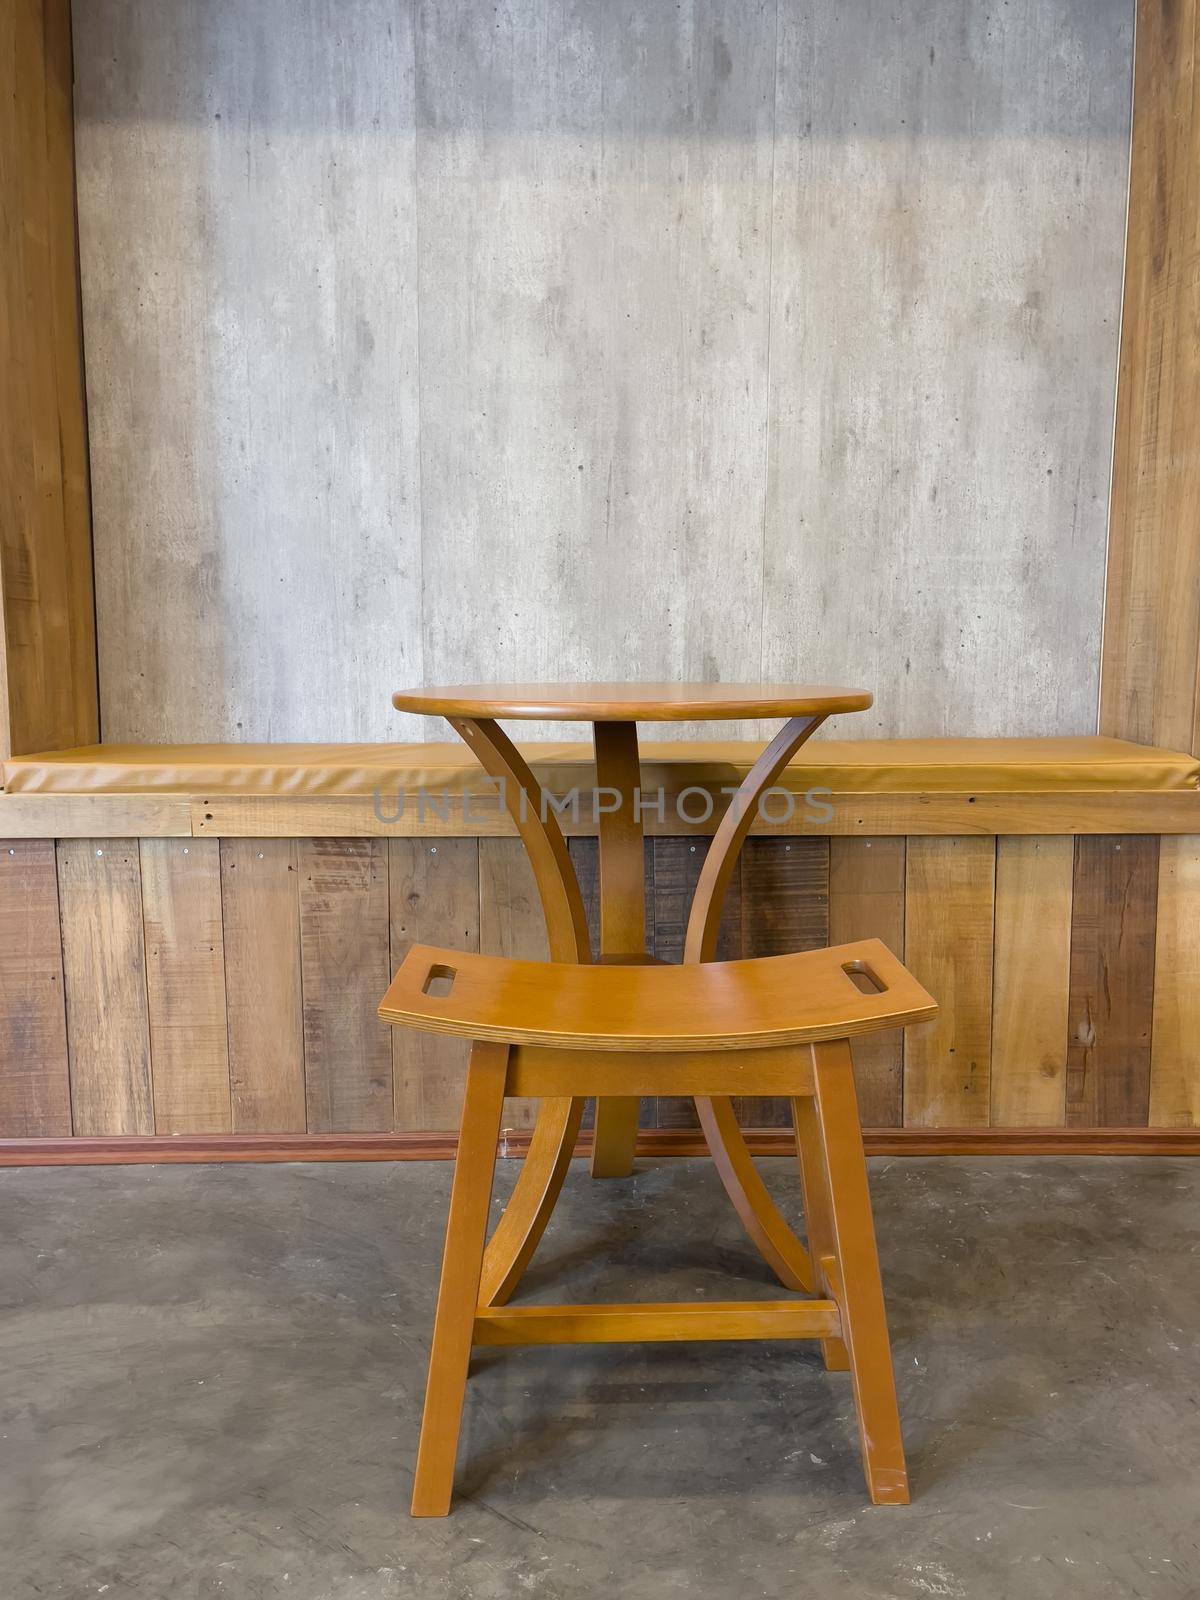 Wooden chair decorated in coffee shop, stock photo